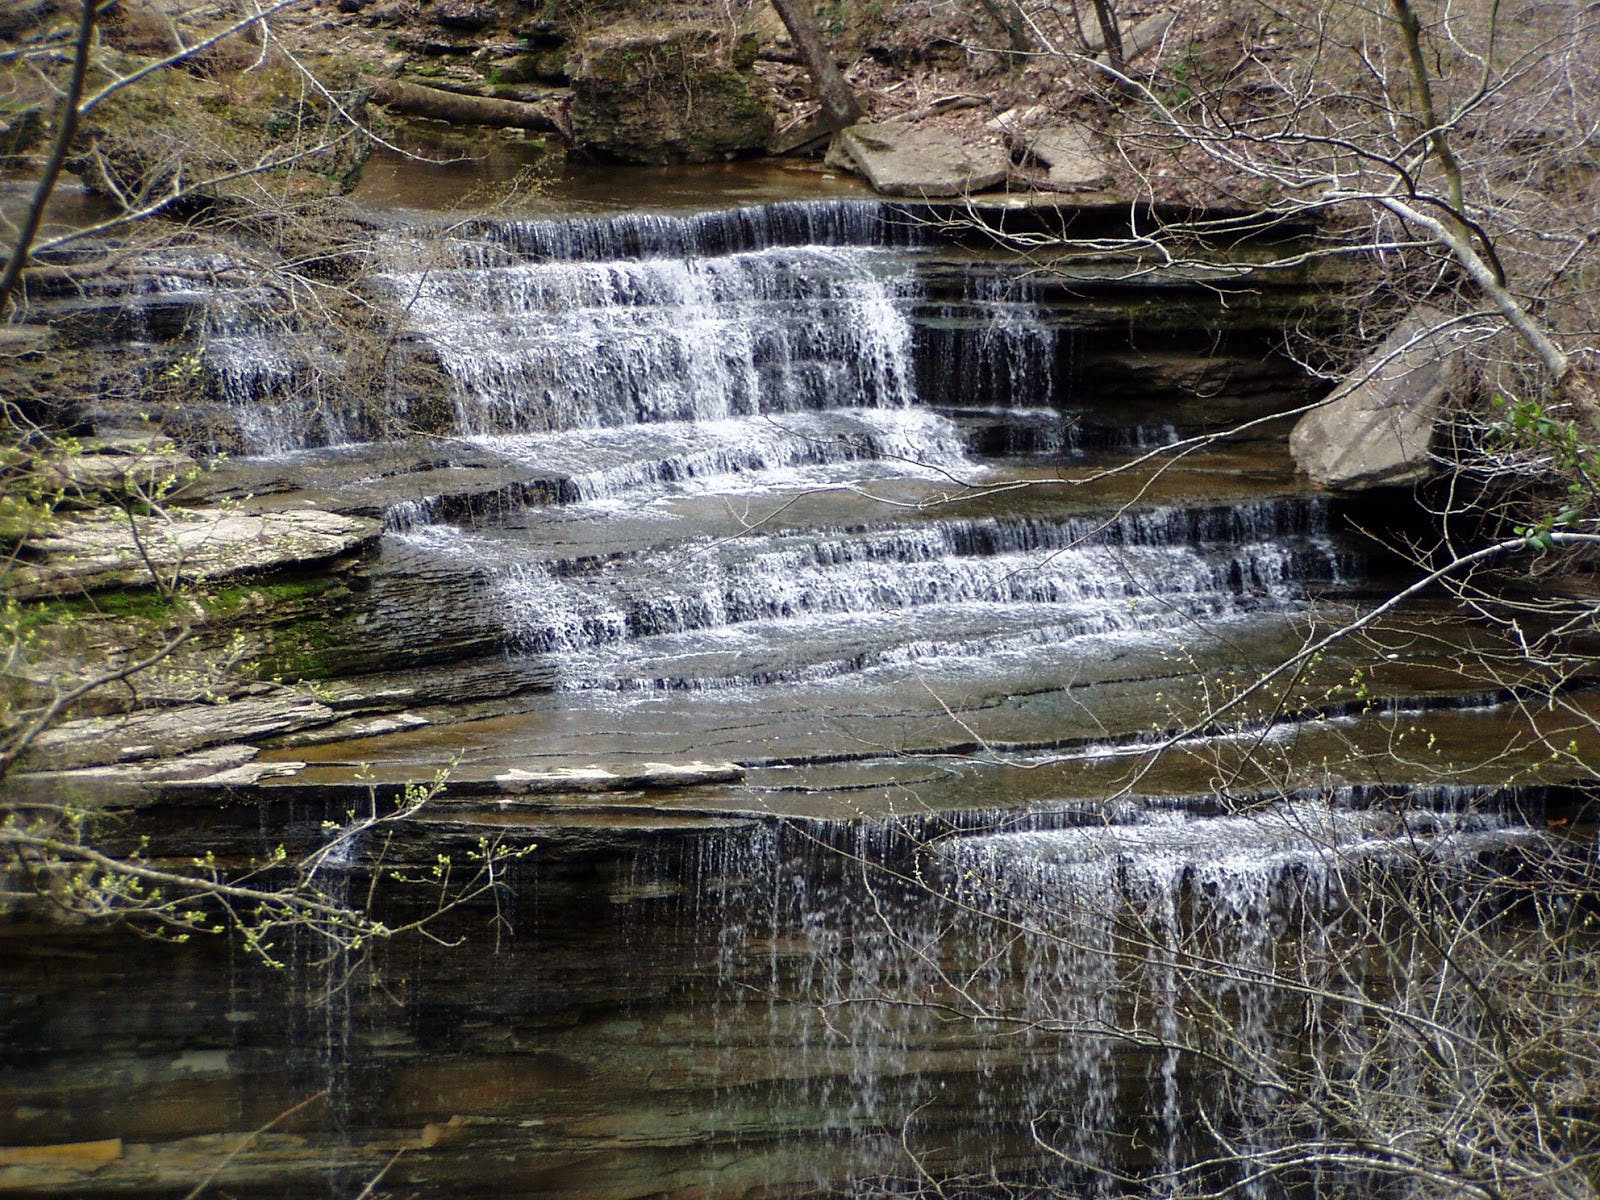 Clifty Falls State Park Campground